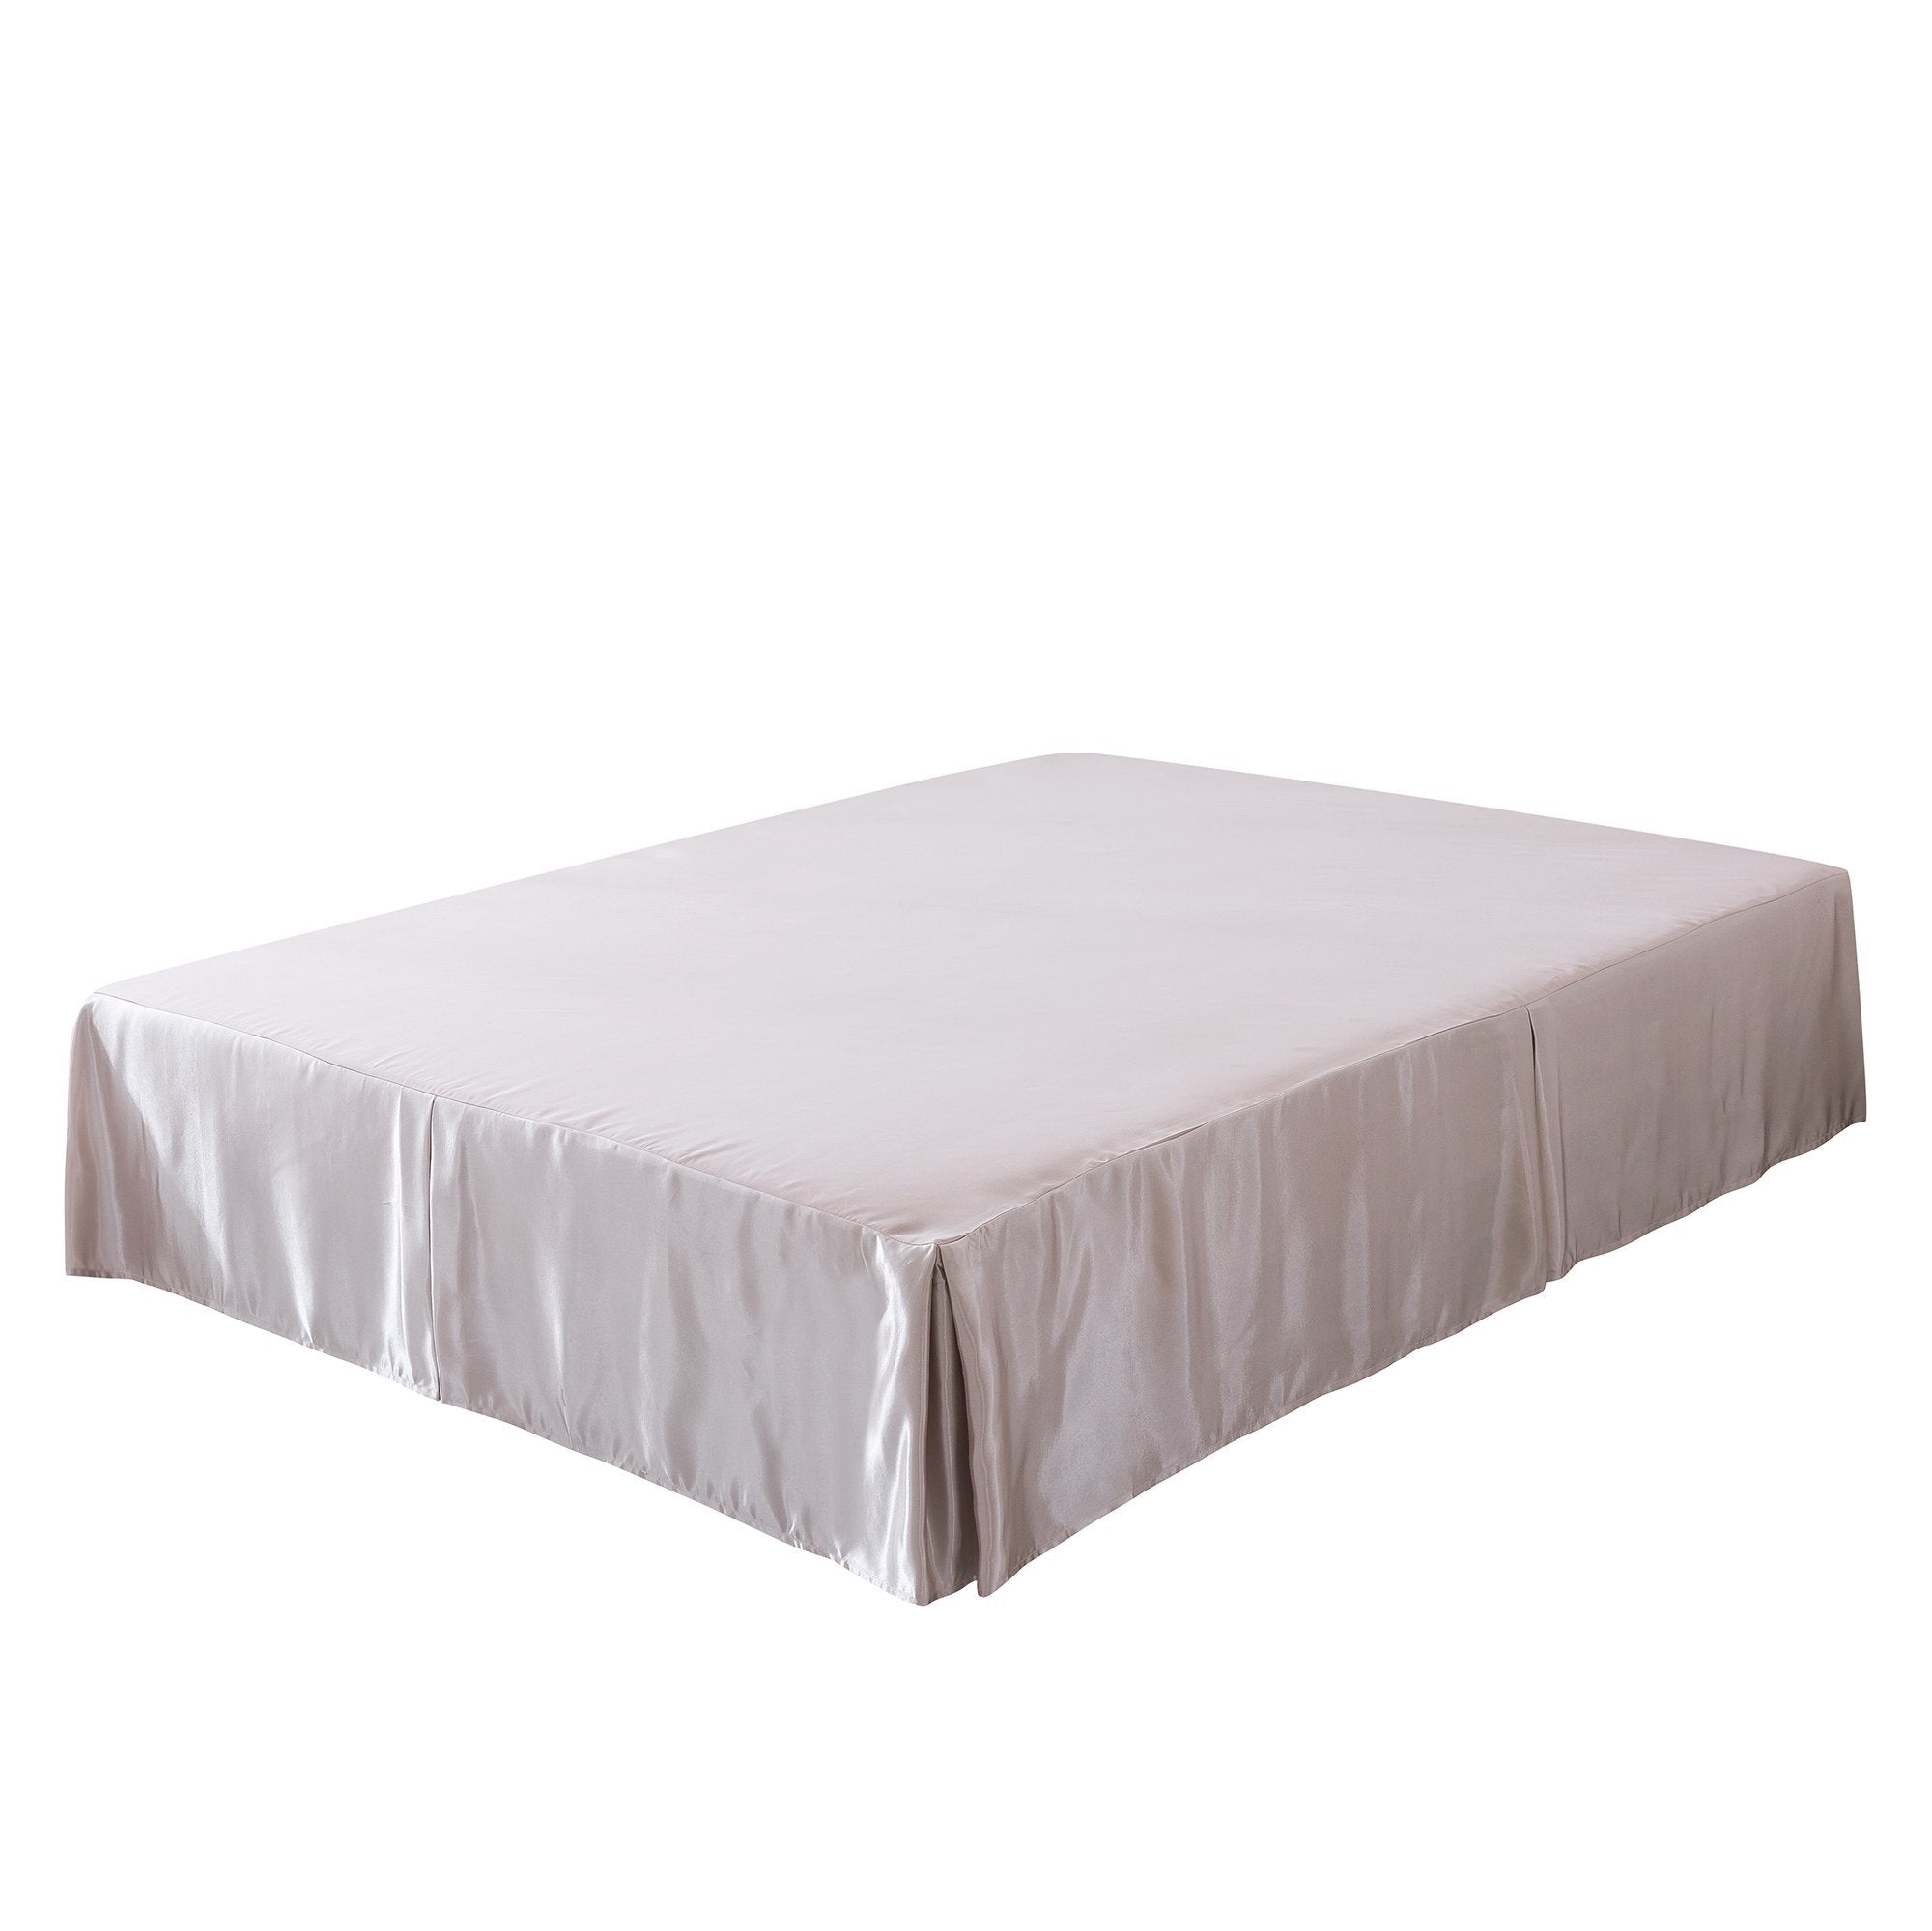 Tache Satin Champagne Beige Frosted Fields Platform Tailored 14" Bed Skirt Dust Ruffle (MZ1051 / MZ002C) - Tache Home Fashion